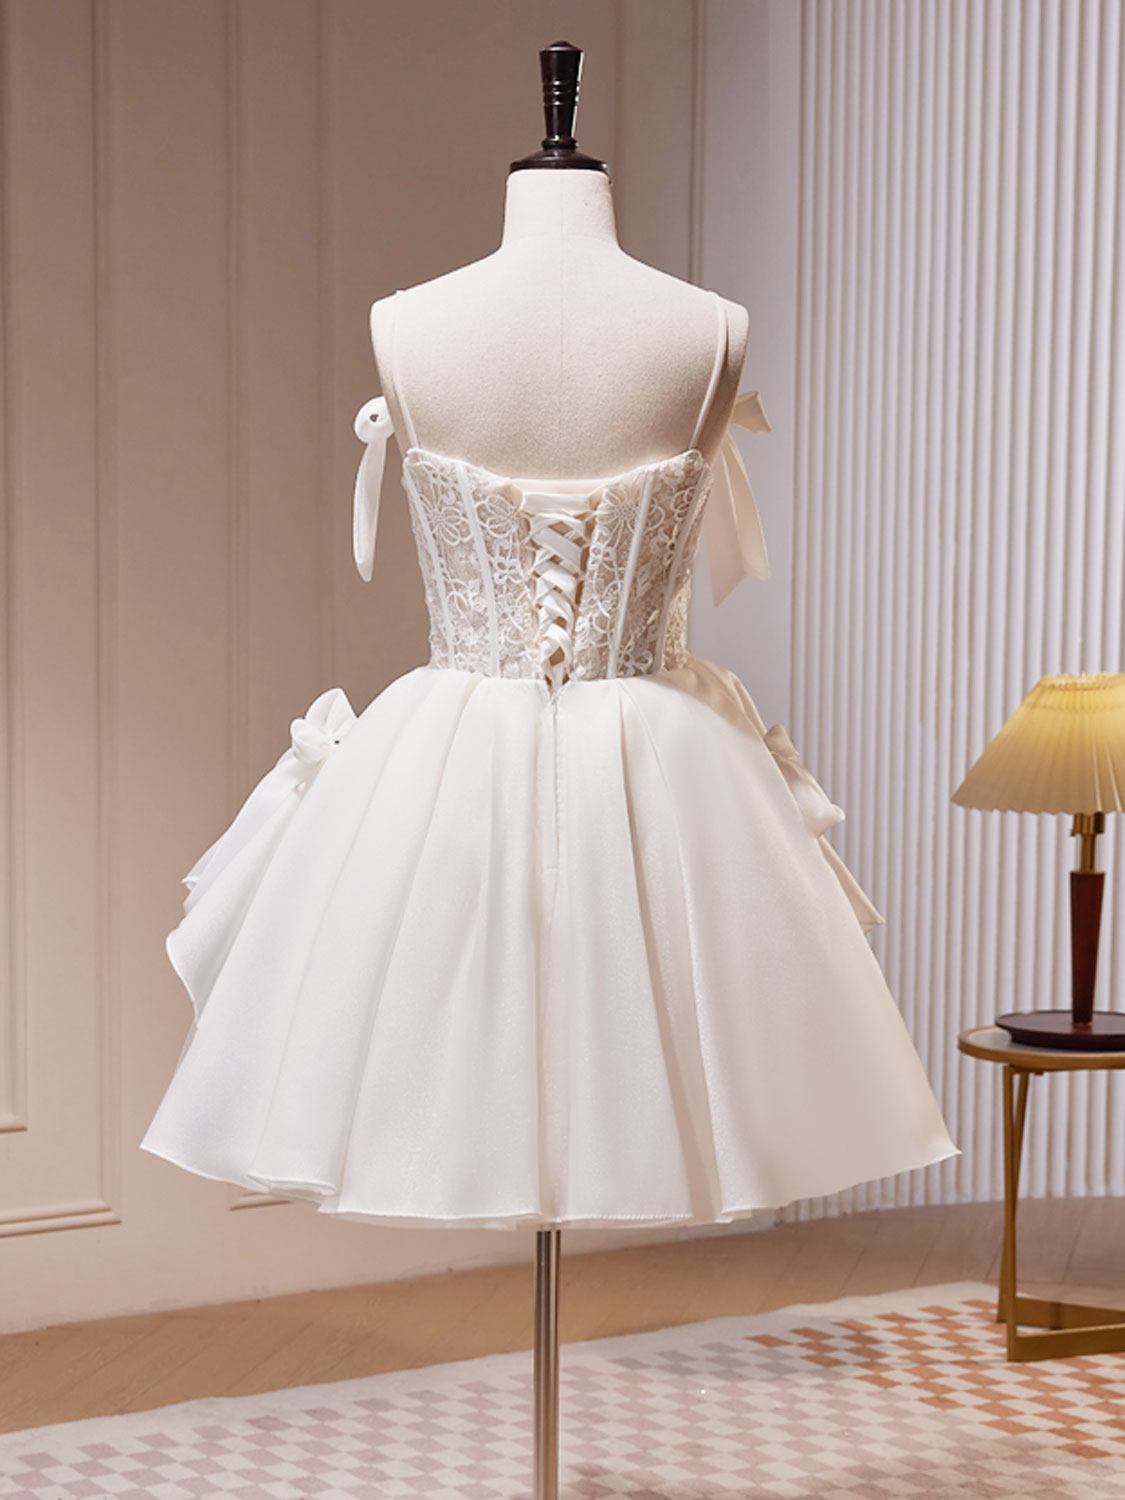 See Through Lace Top White Short Homecoming Dress - DollyGown